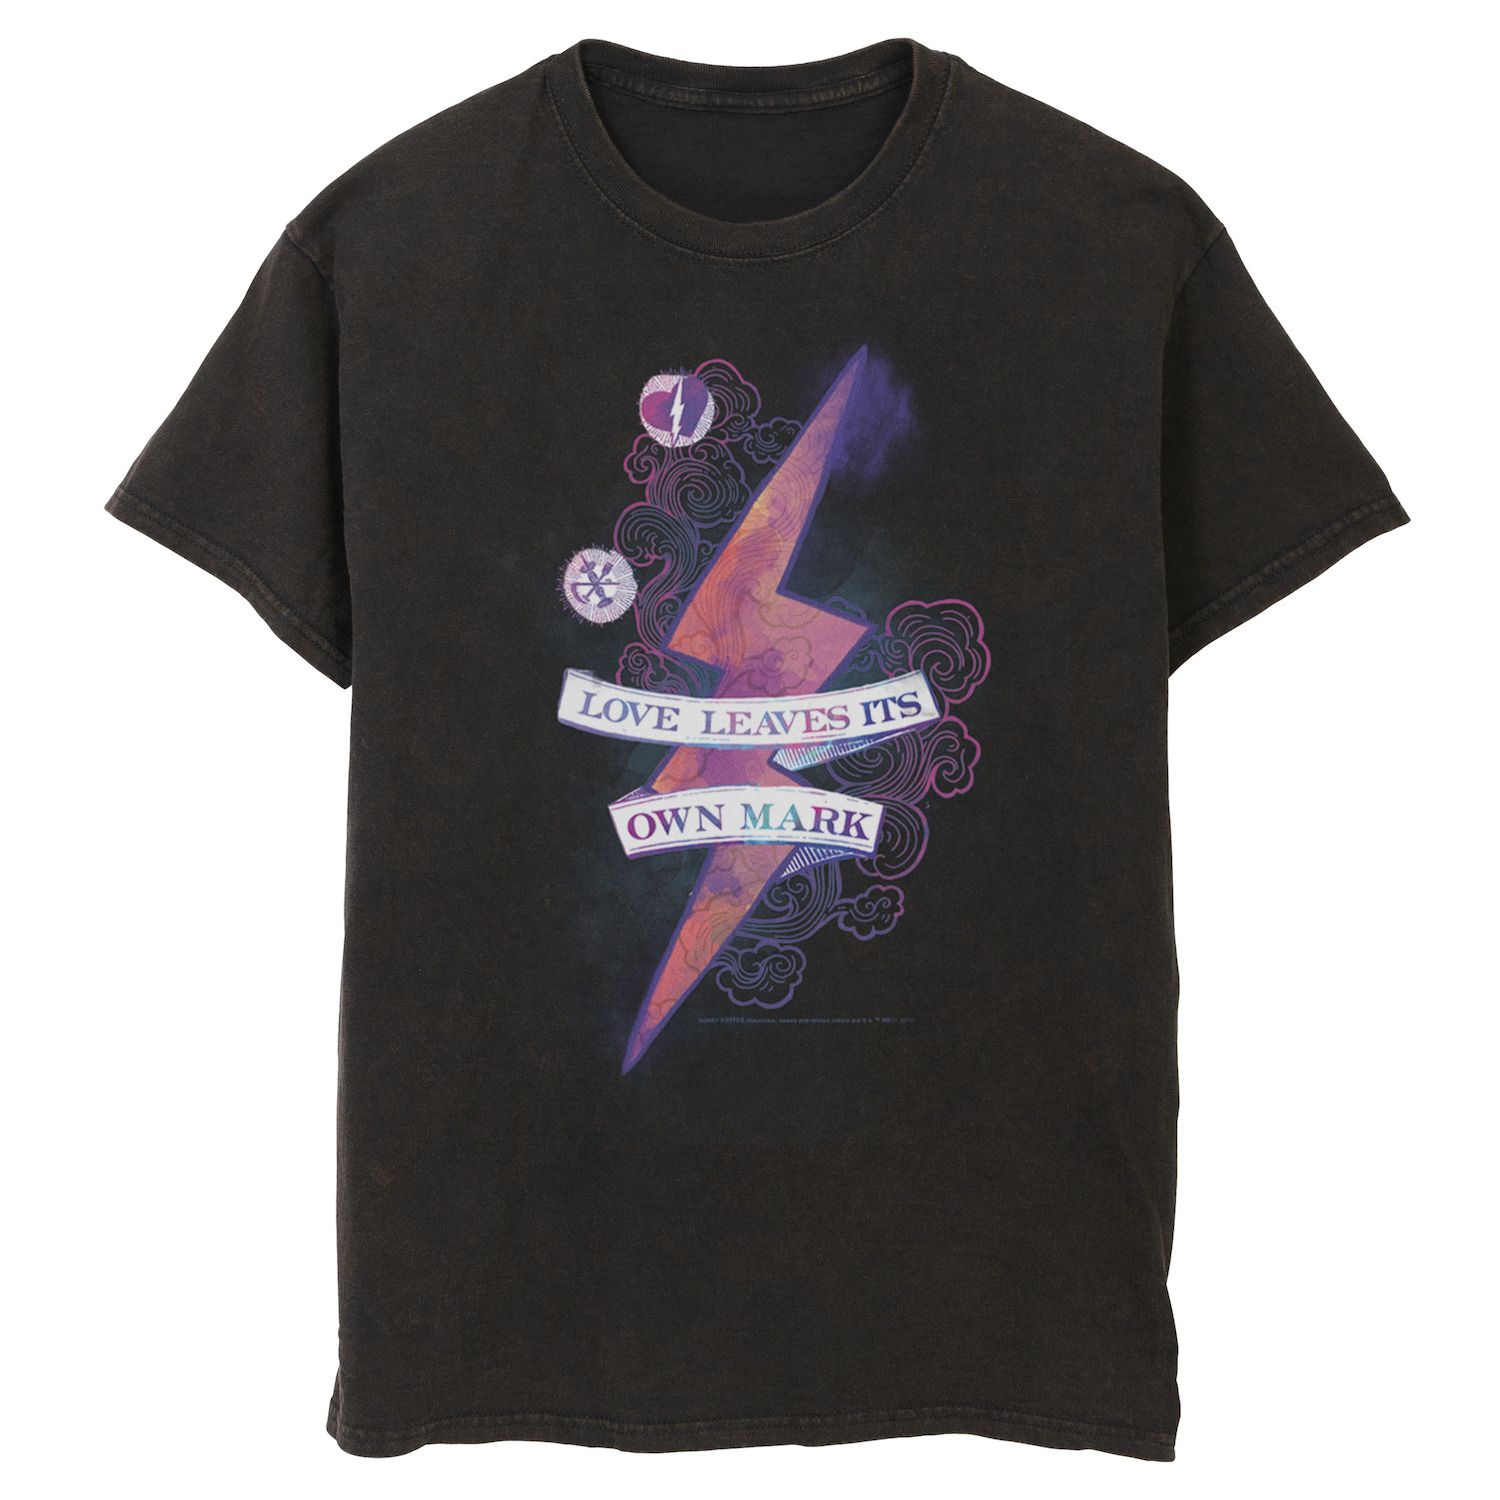 Image for Harry Potter Men's Love Leaves It's Own Mark Graphic Tee at Kohl's.